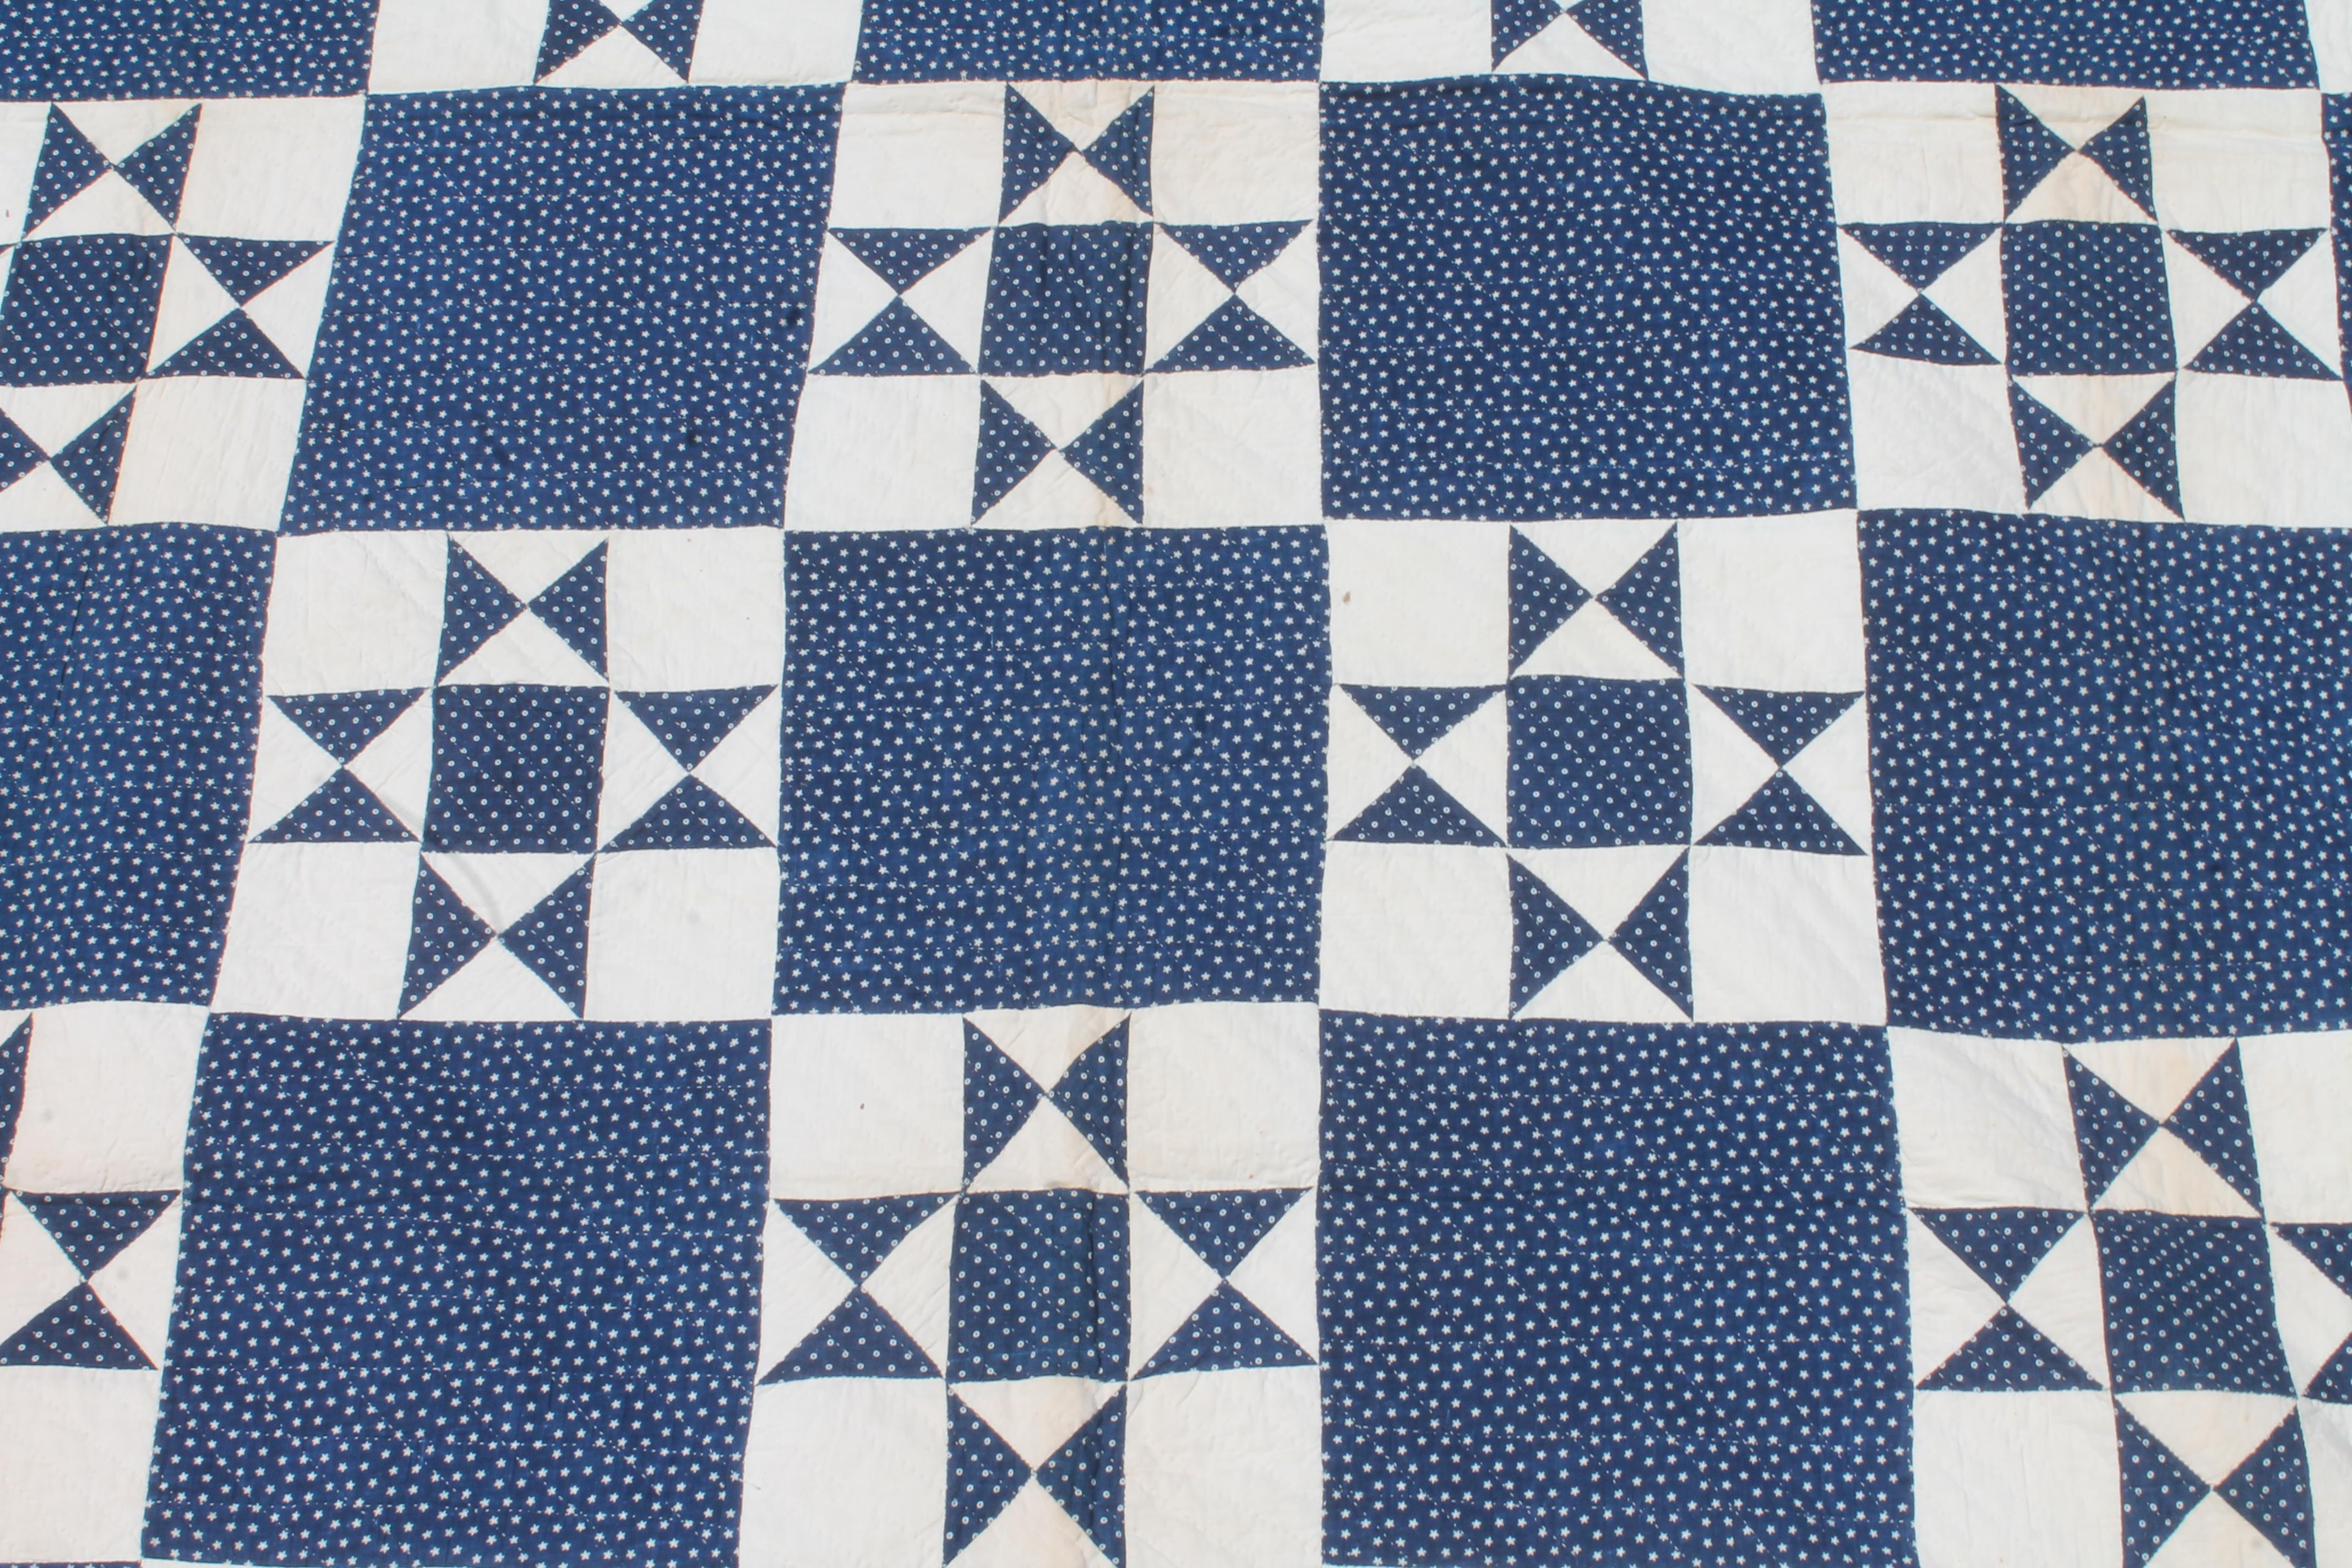 This fine 19thc indigo blue back round quilt in a eight point star pattern is in fine condition. Most unusual blue calico back round fabric.